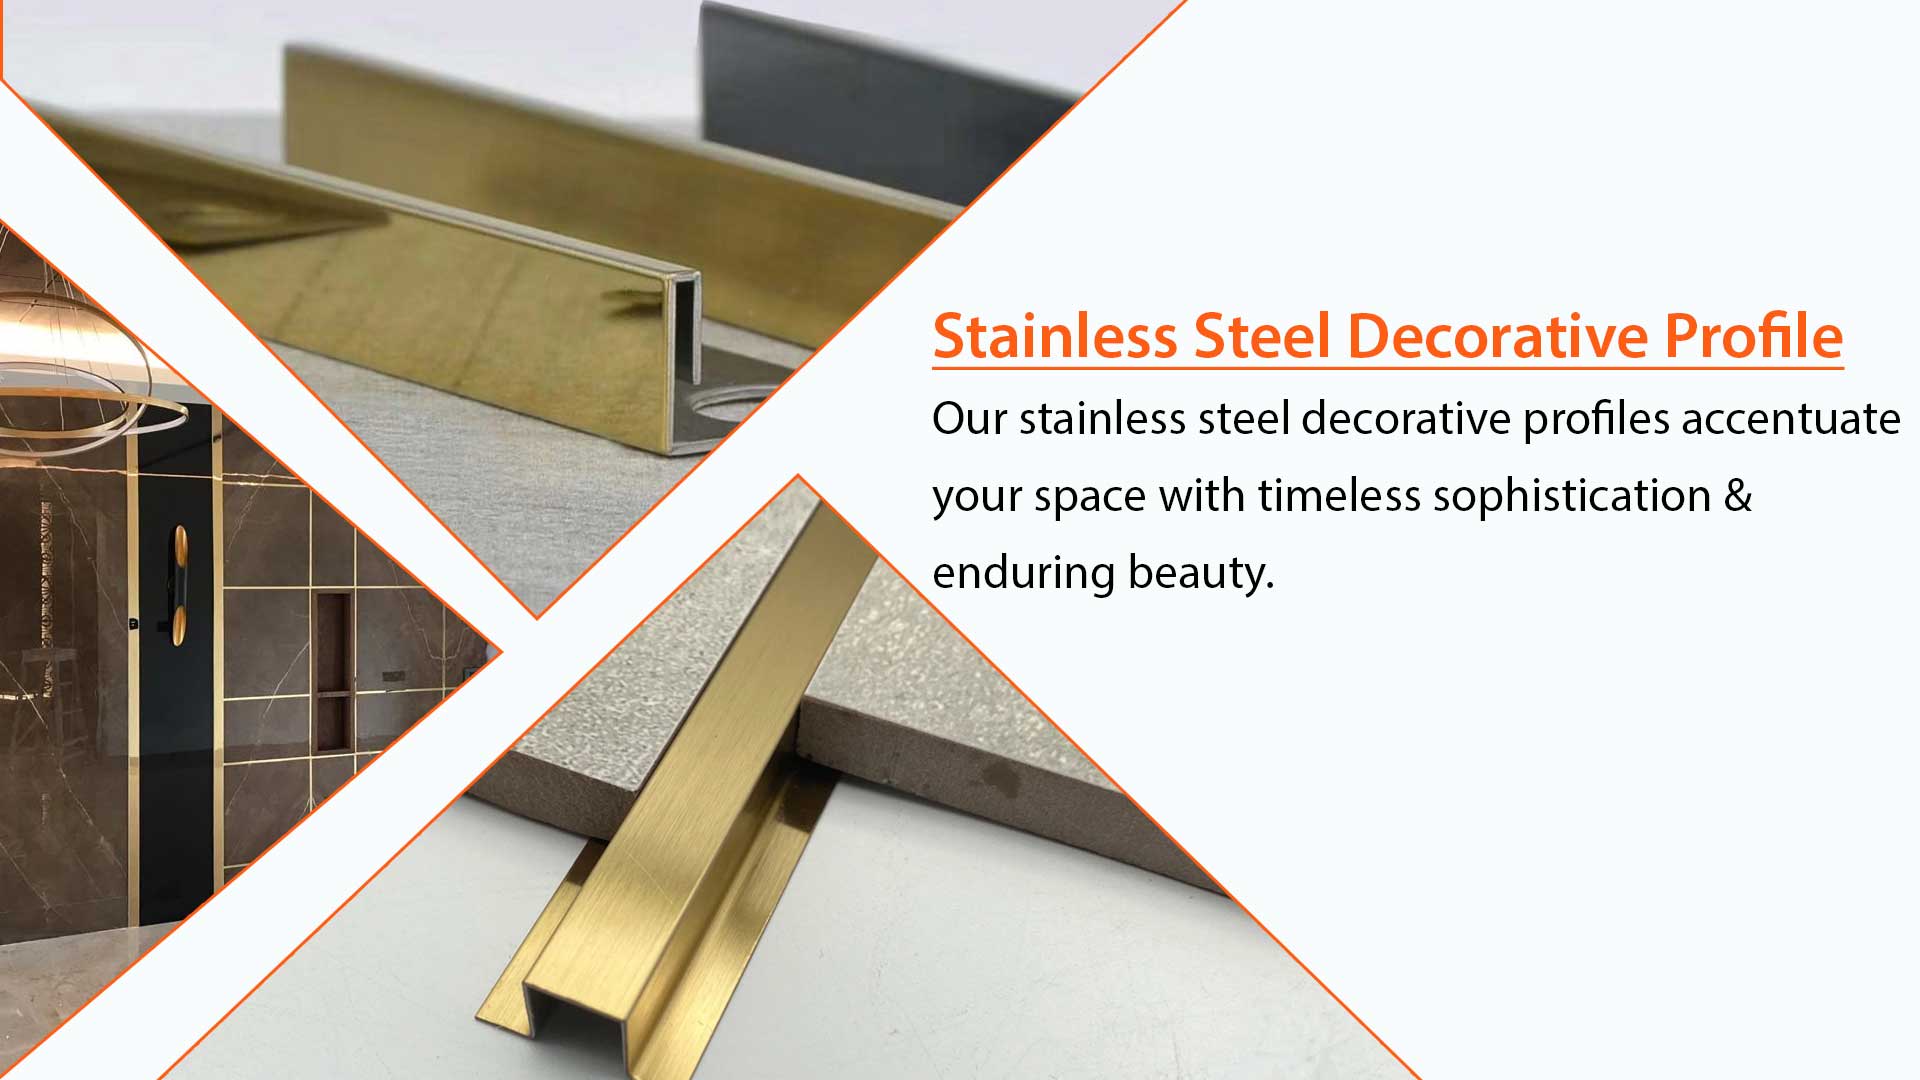 Stainless Steel Decorative Profile in Thanjavur